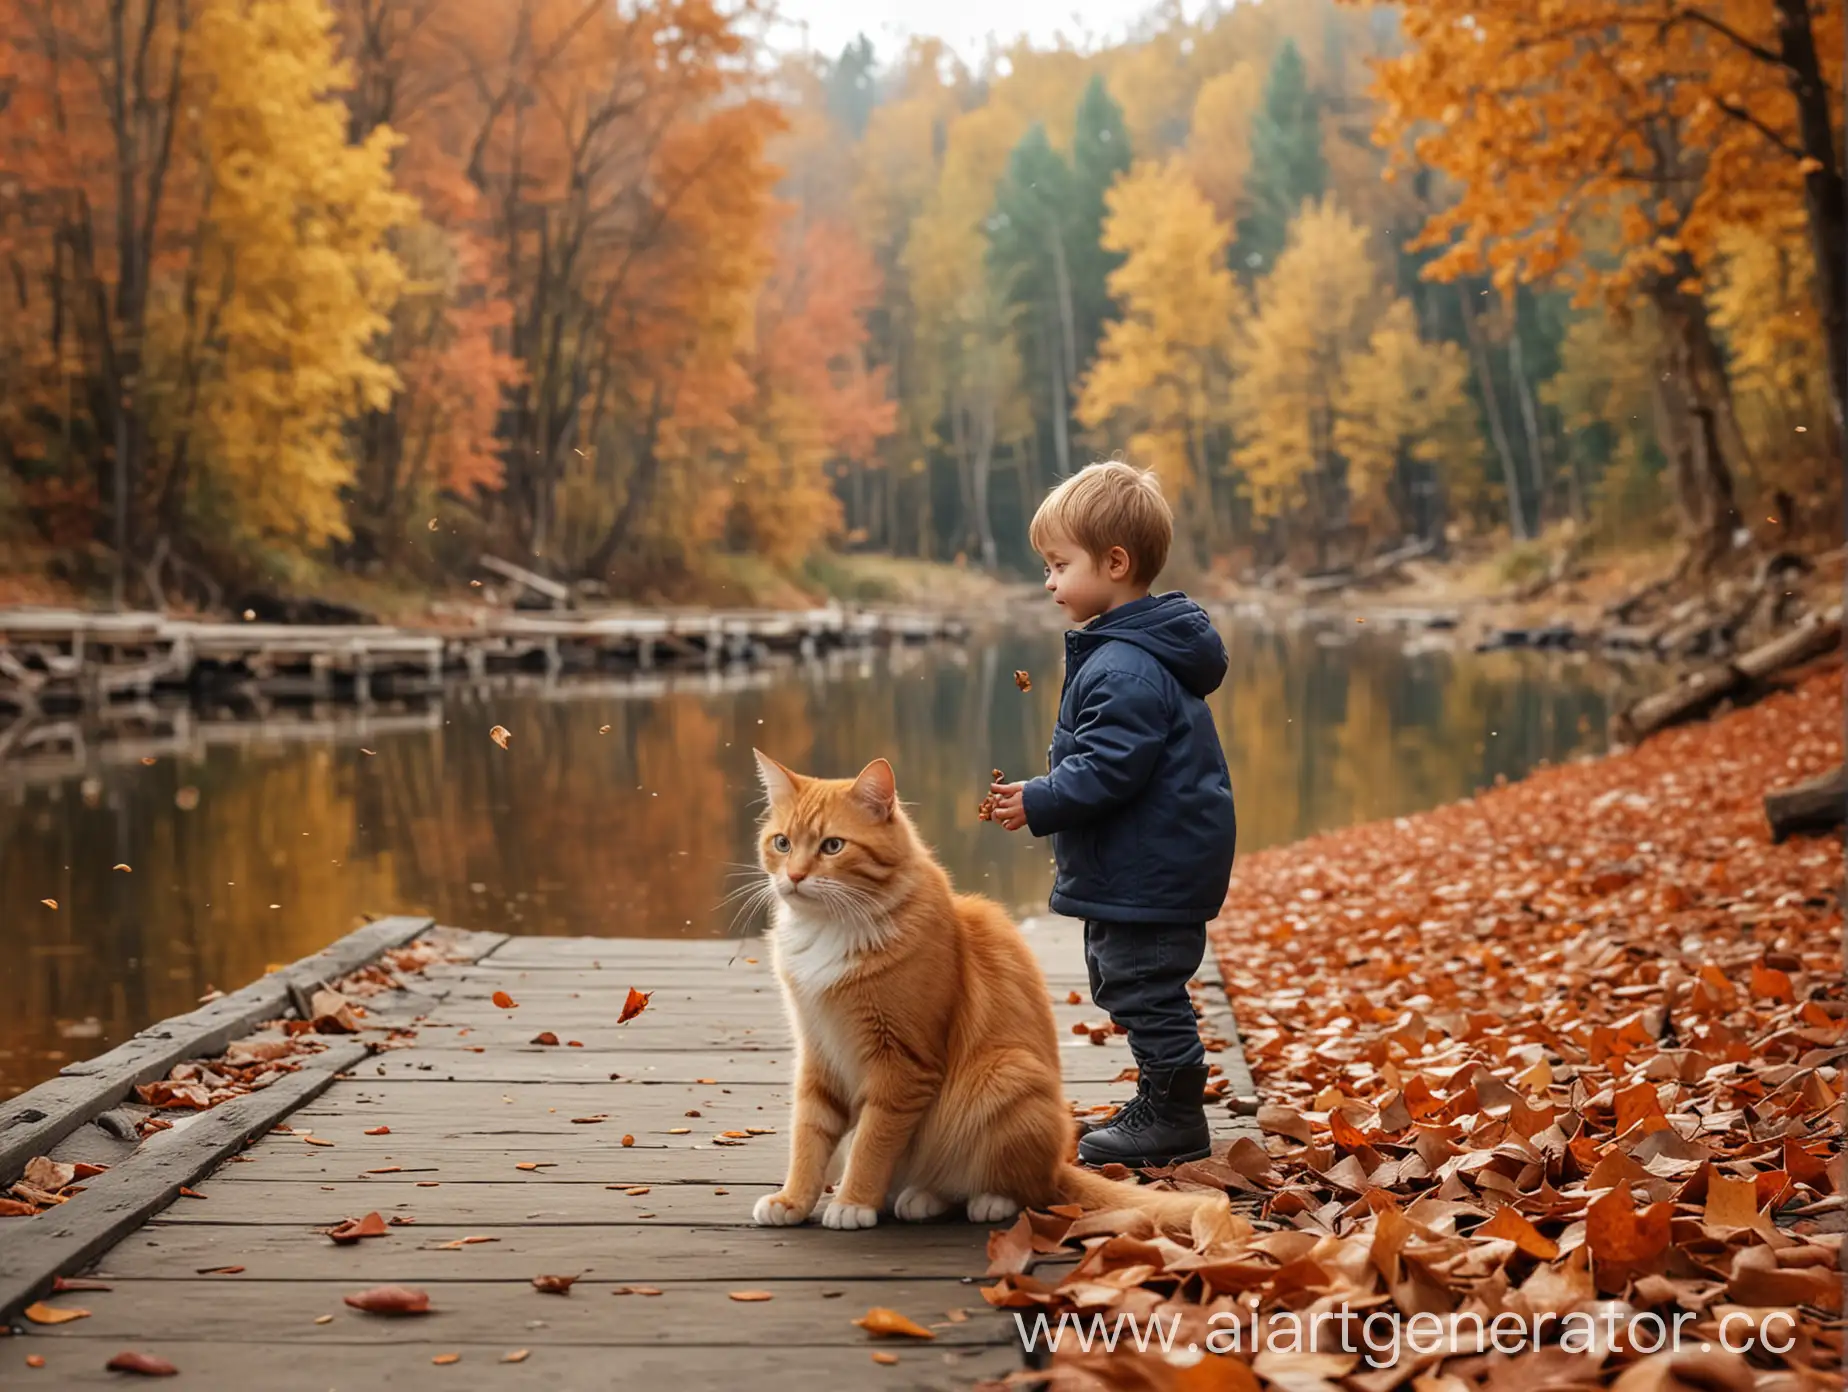 Child-Fishing-on-Pier-with-Red-Cat-and-Autumn-Forest-Background